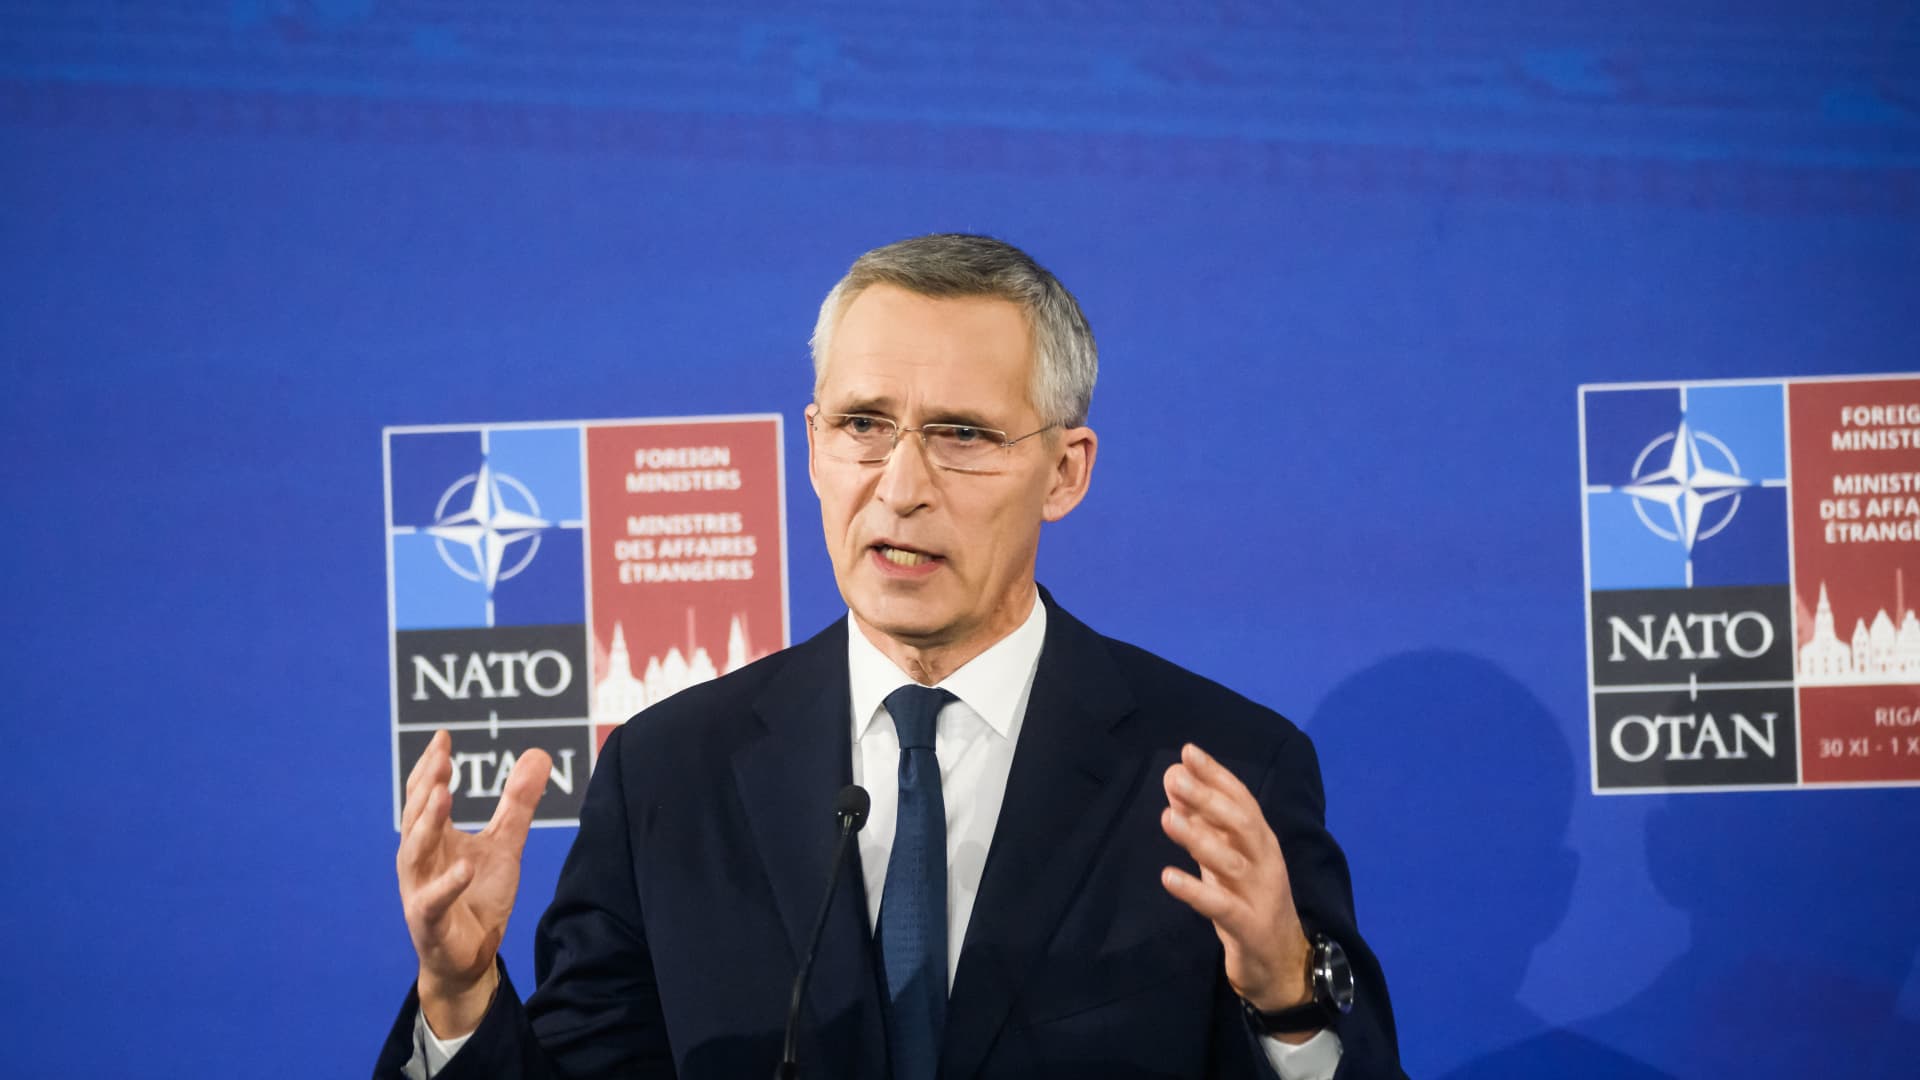 NATO Secretary General Jens Stoltenberg during a meeting of NATO foreign ministers to discuss how to counter a Russian military build-up on Ukraine's border amid fears the Kremlin could be preparing to invade, taken in Riga, Latvia on November 30, 2021.